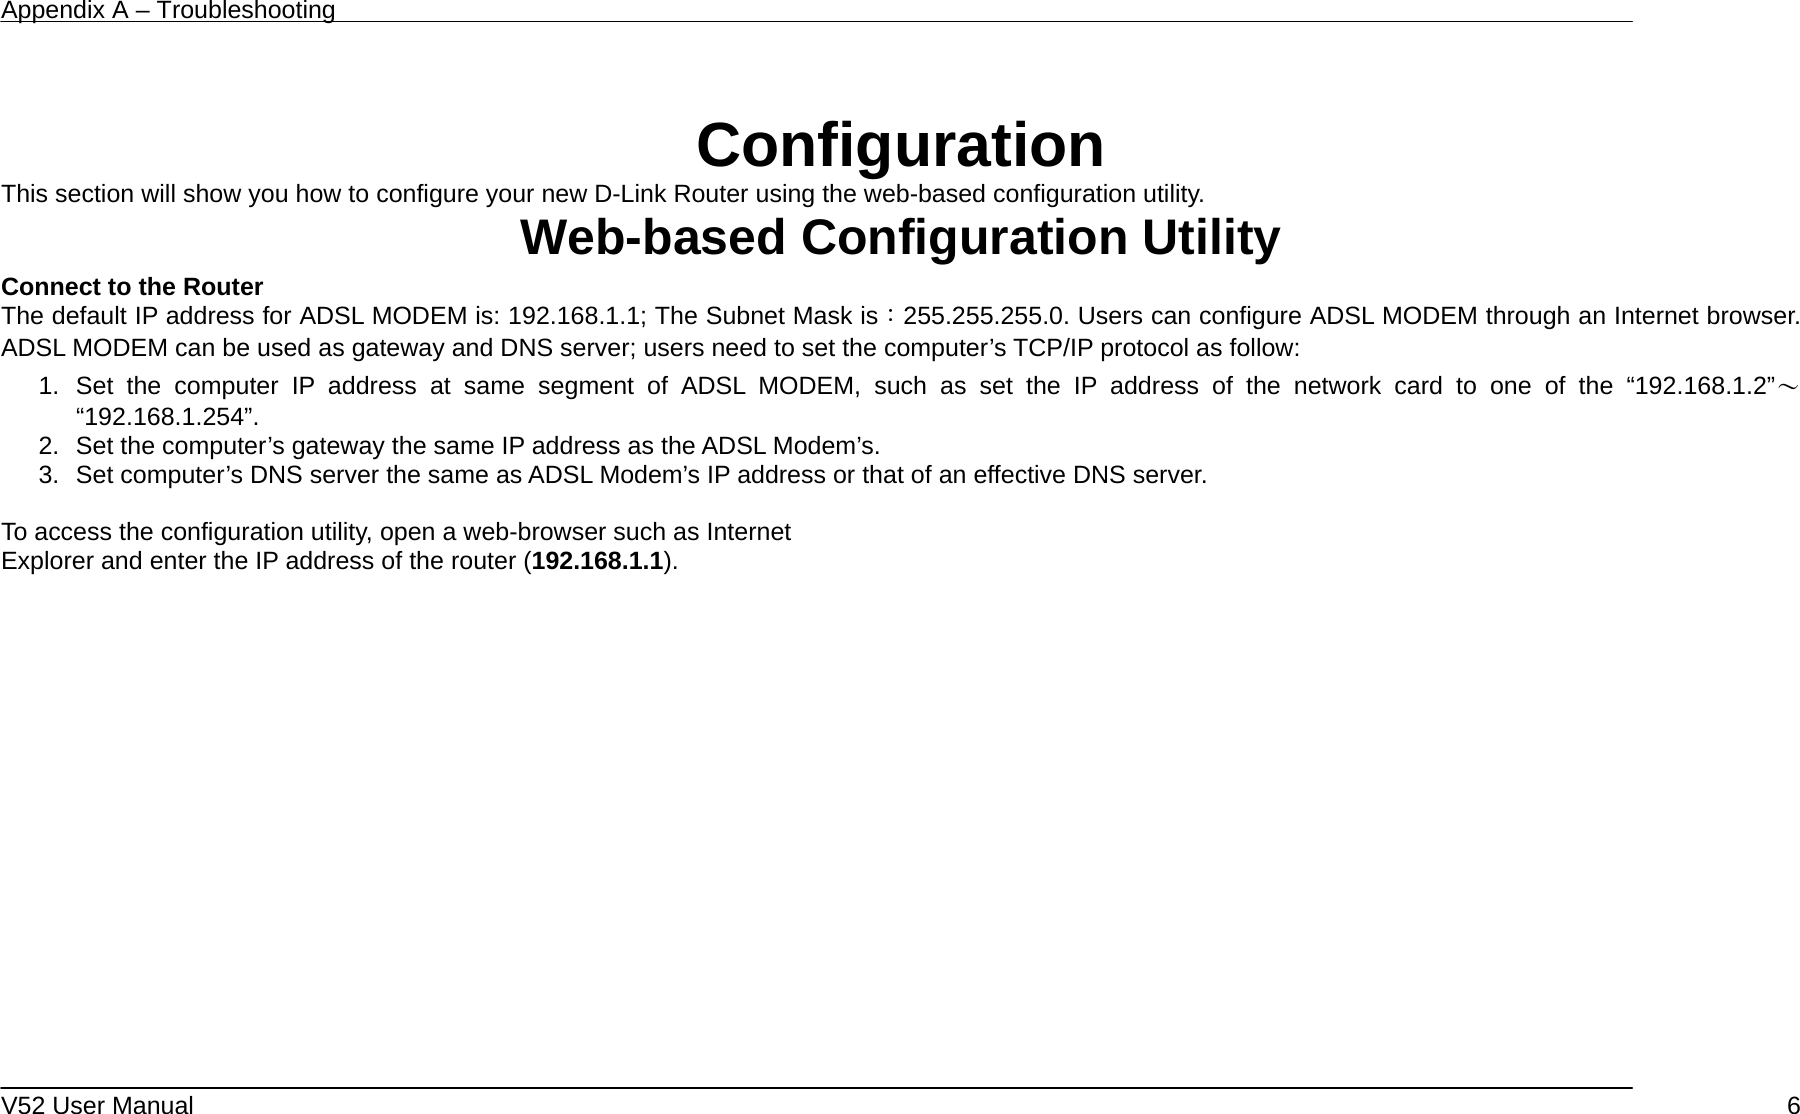 Appendix A – Troubleshooting   V52 User Manual    6 Configuration This section will show you how to configure your new D-Link Router using the web-based configuration utility. Web-based Configuration Utility Connect to the Router   The default IP address for ADSL MODEM is: 192.168.1.1; The Subnet Mask is：255.255.255.0. Users can configure ADSL MODEM through an Internet browser. ADSL MODEM can be used as gateway and DNS server; users need to set the computer’s TCP/IP protocol as follow: 1. Set the computer IP address at same segment of ADSL MODEM, such as set the IP address of the network card to one of the “192.168.1.2”～ “192.168.1.254”. 2.  Set the computer’s gateway the same IP address as the ADSL Modem’s. 3.  Set computer’s DNS server the same as ADSL Modem’s IP address or that of an effective DNS server.  To access the configuration utility, open a web-browser such as Internet Explorer and enter the IP address of the router (192.168.1.1).     